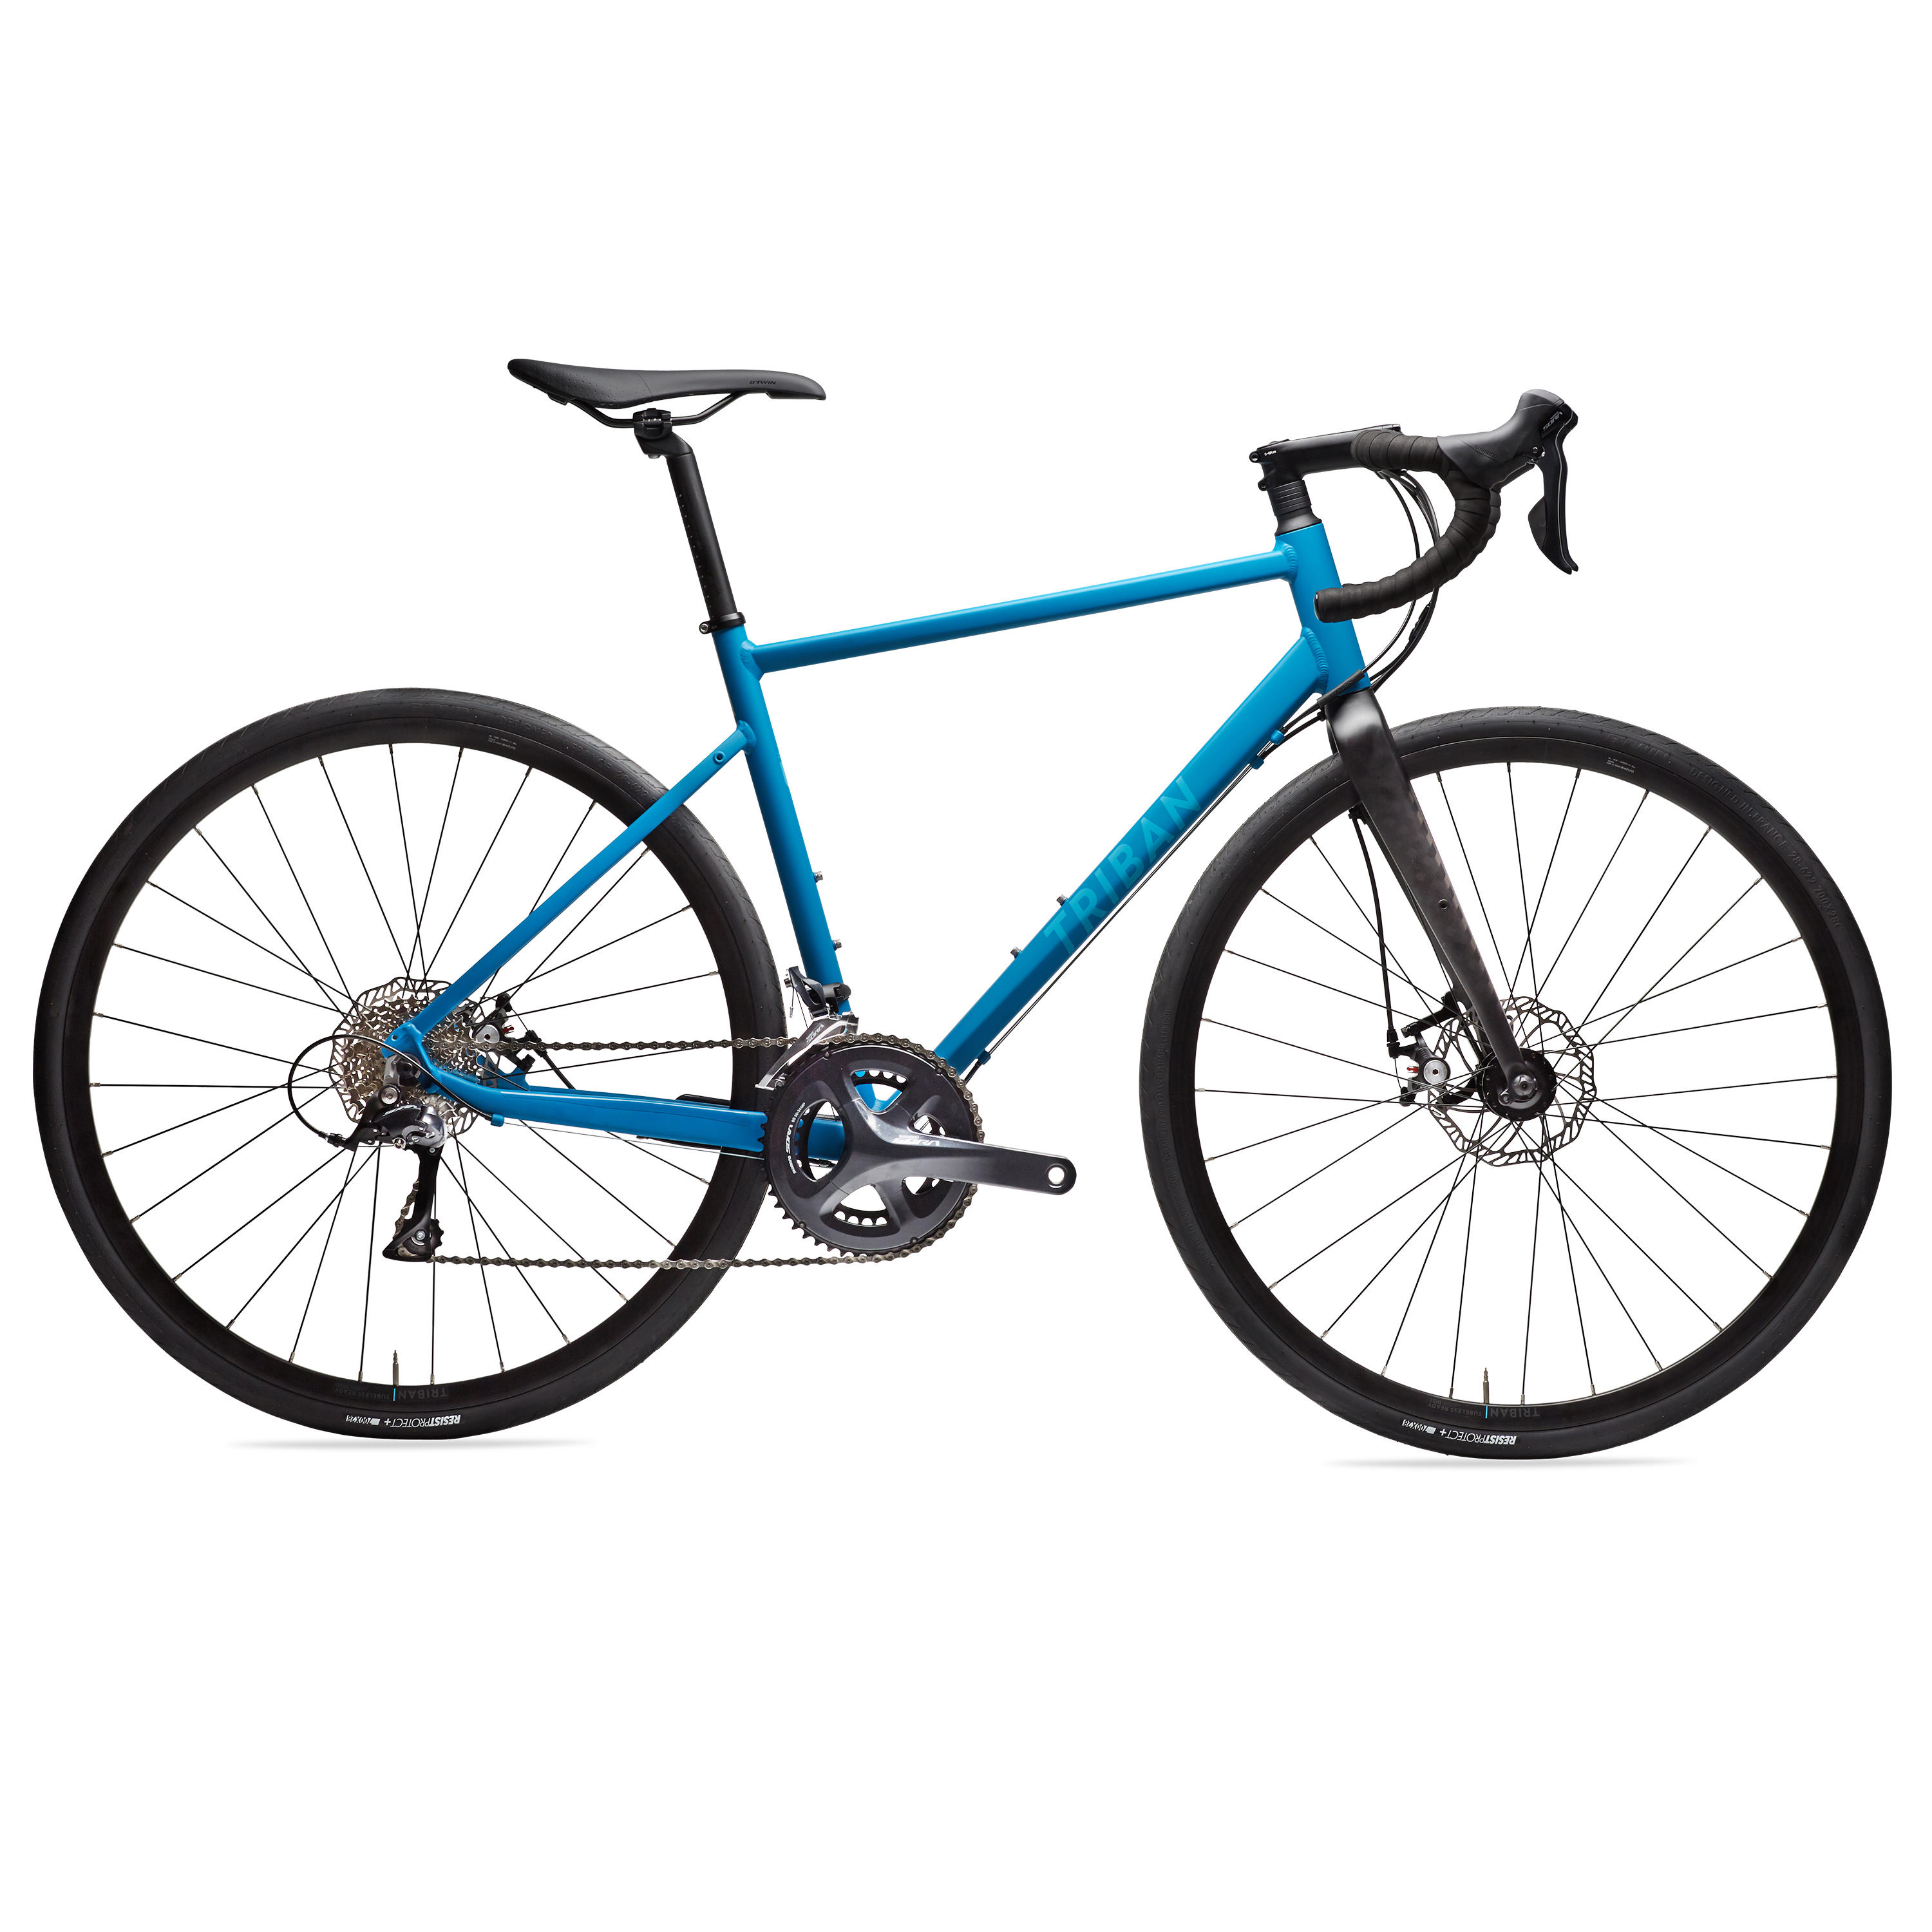 Blue Triban RC500 road bike with disc brakes and Shimano Sora groupset